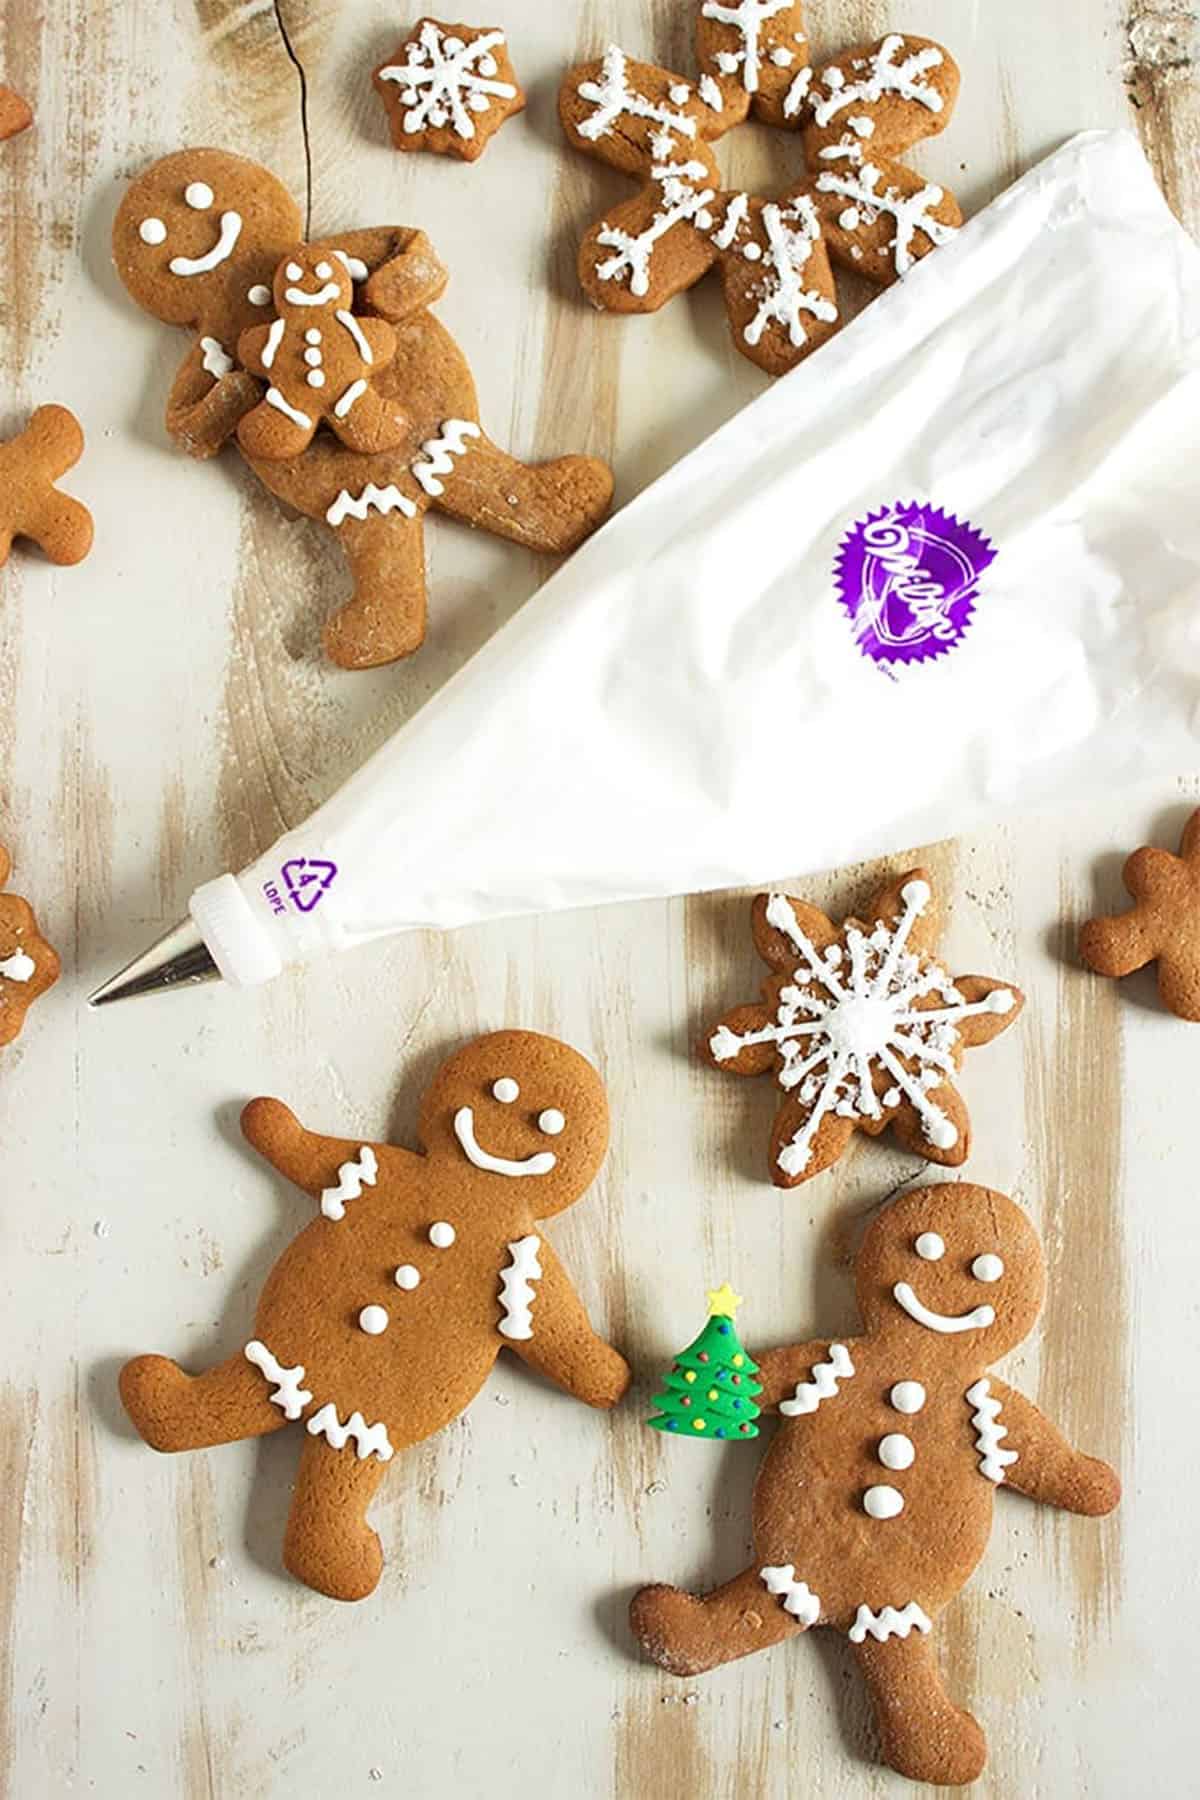 a wilton piping bag filled with royal icing place among gingerbread cookies